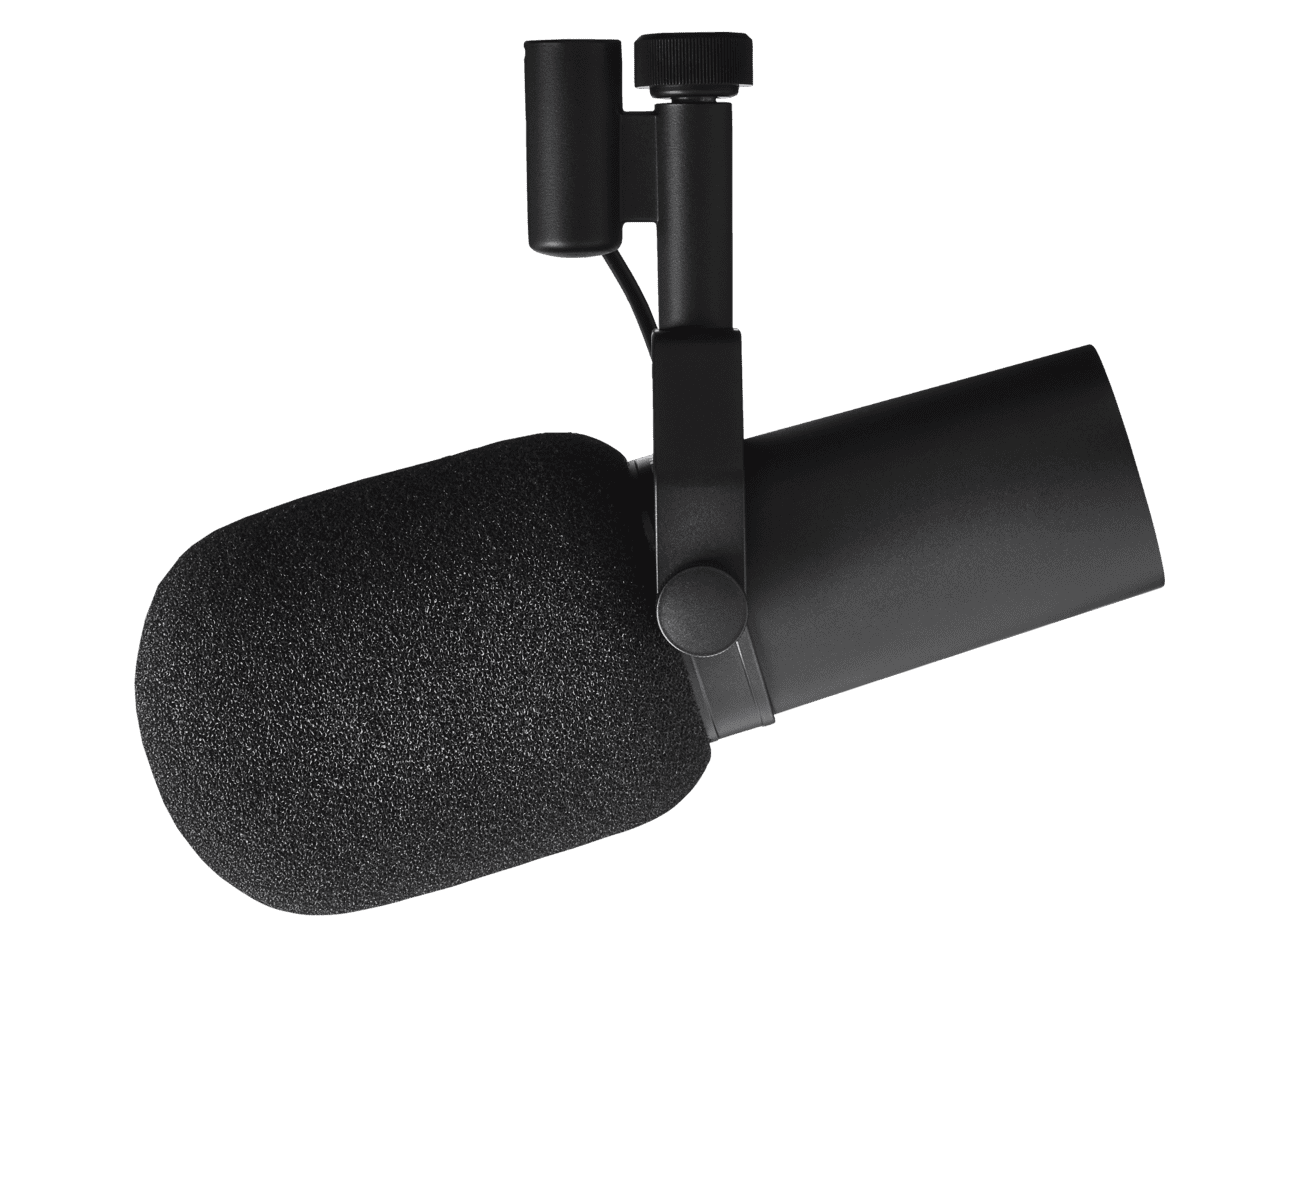 Sm7b Broadcast Microphone By Shure Available Hytek Electronics